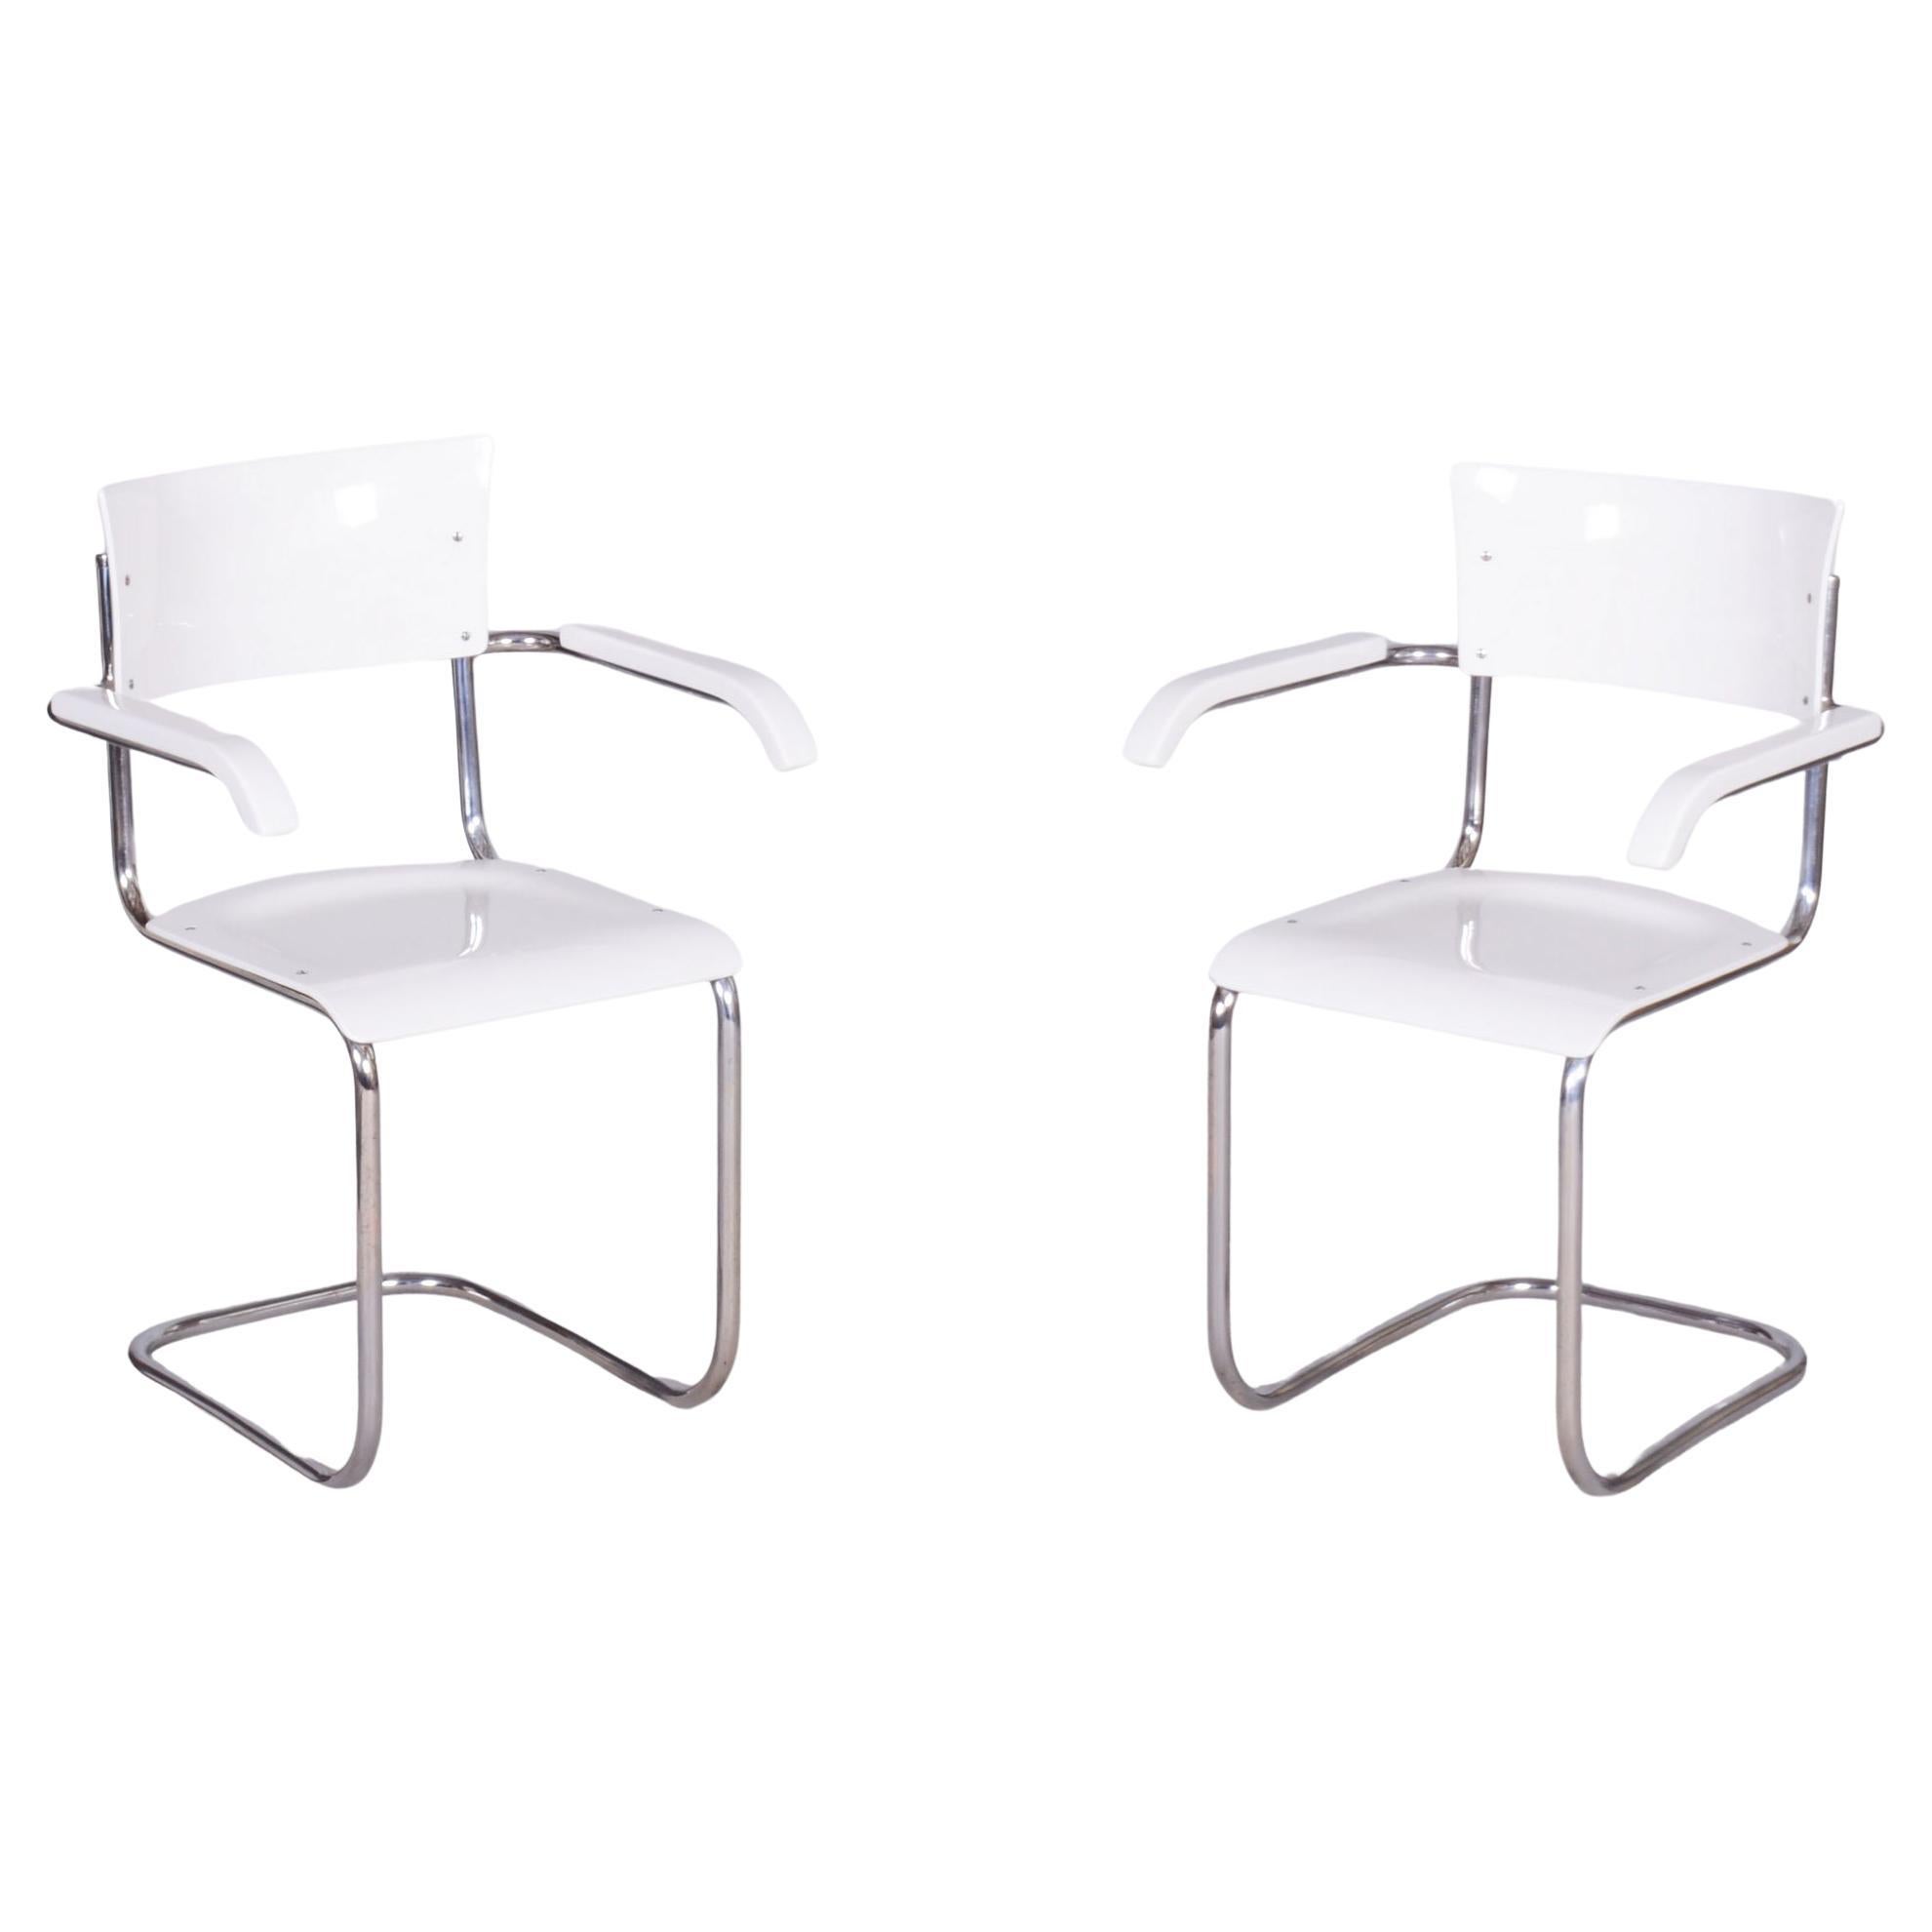 Restored Bauhaus Pair of Chairs, by Mart Stam, Chrome, Germany, 1930s For Sale